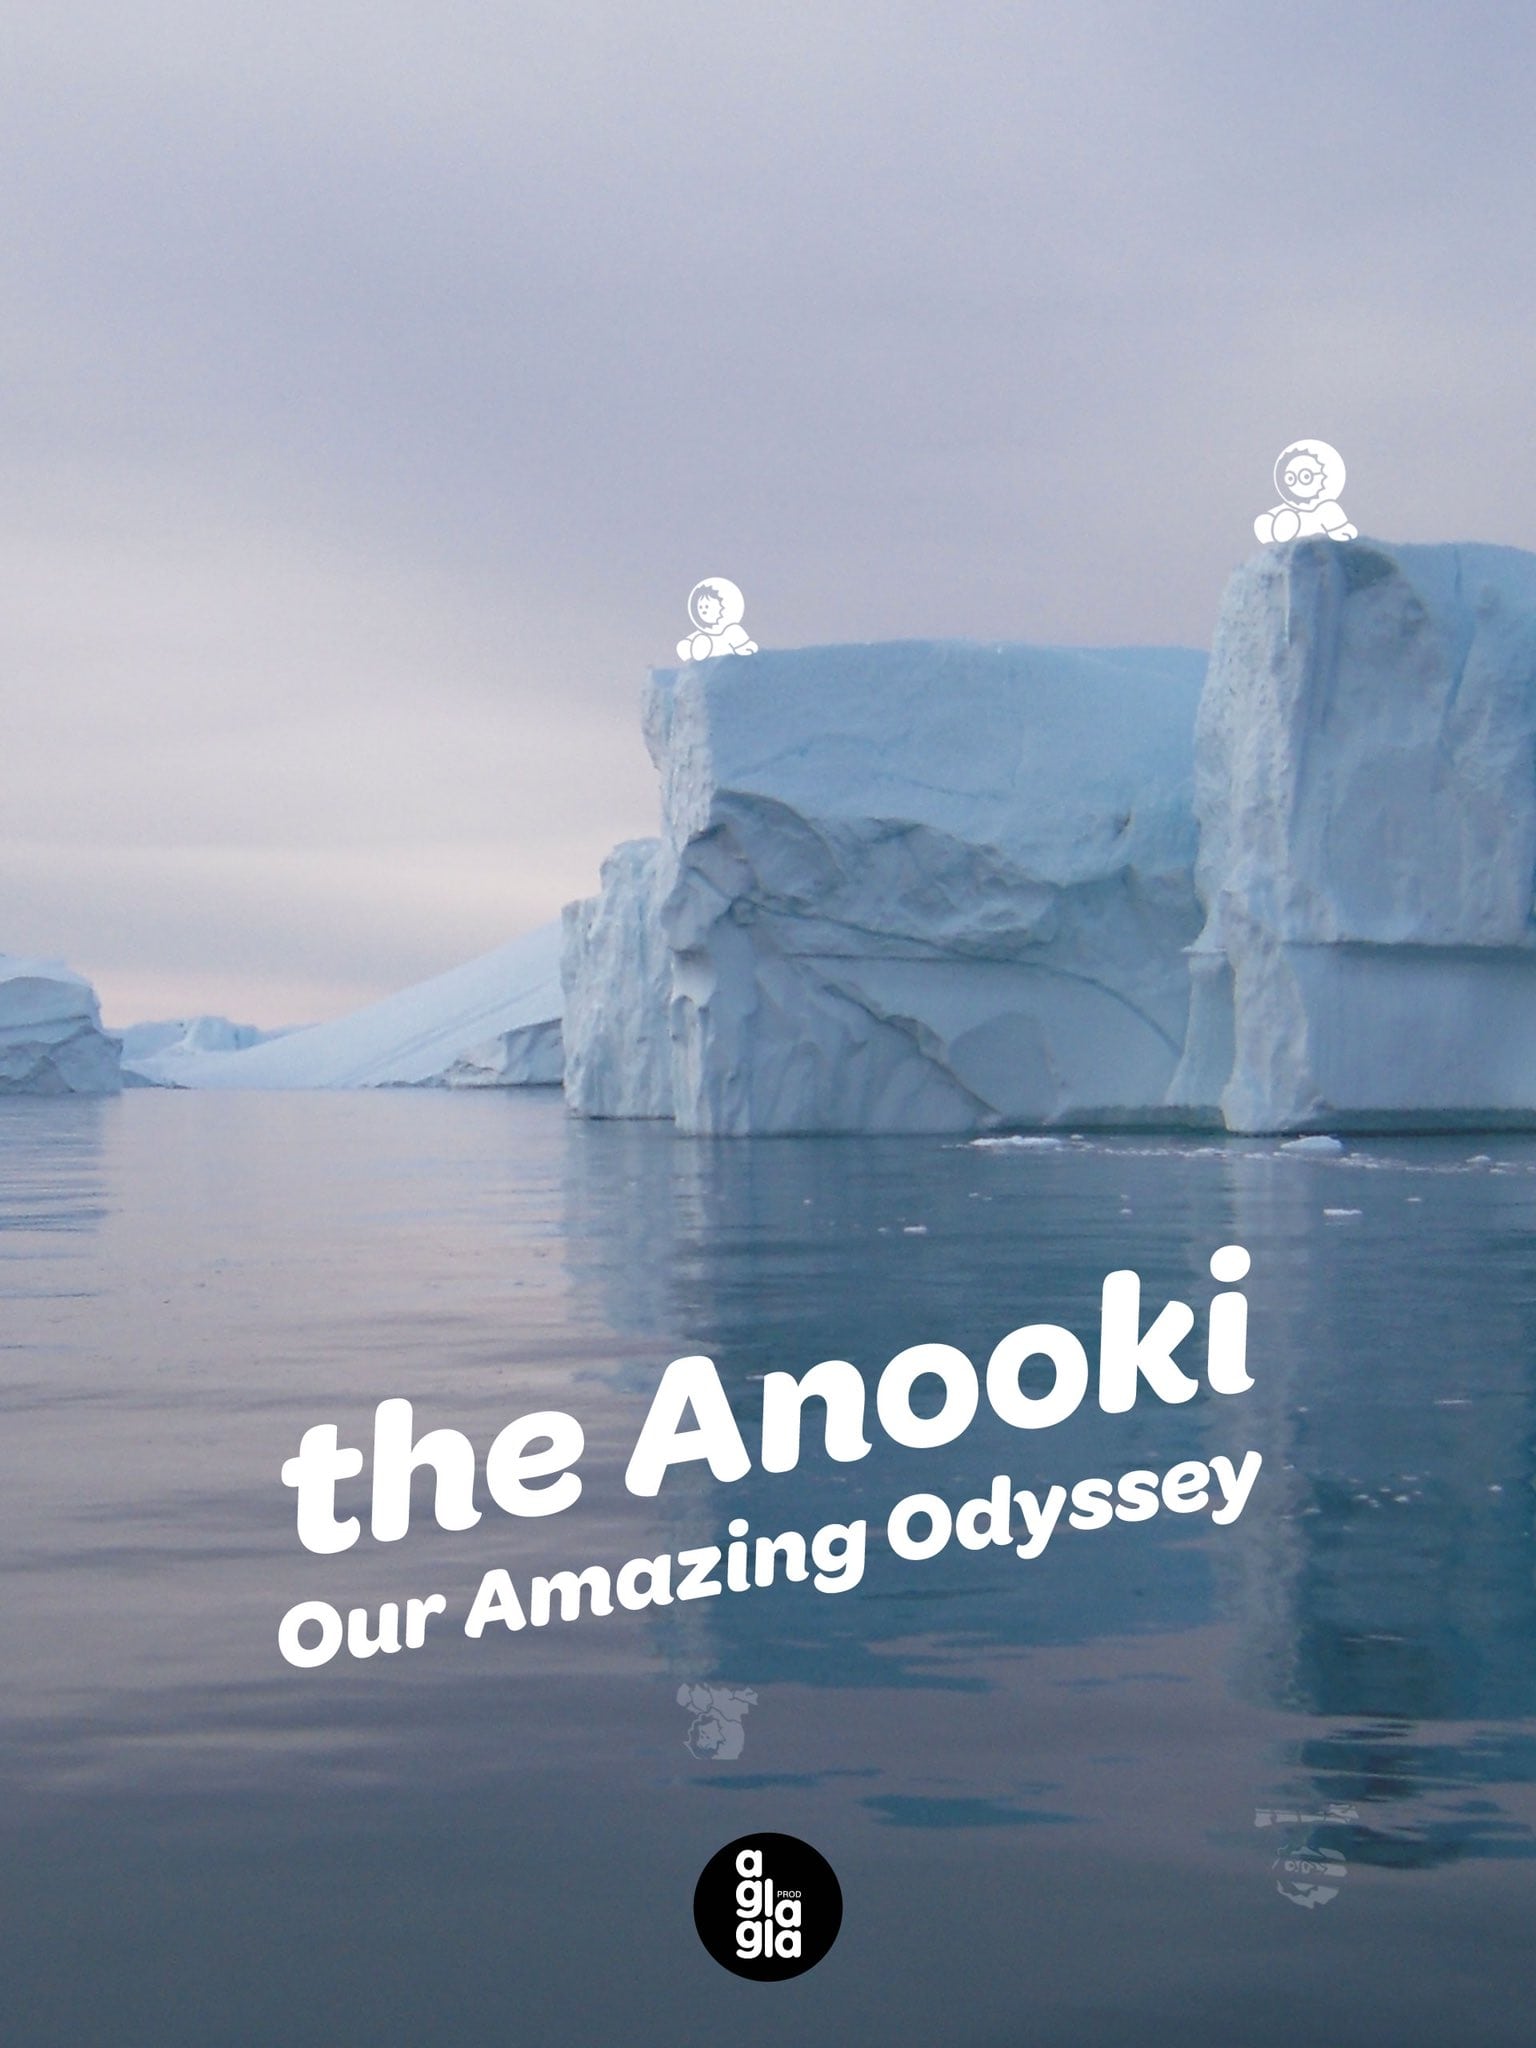 The Anooki, Our Amazing Odyssey